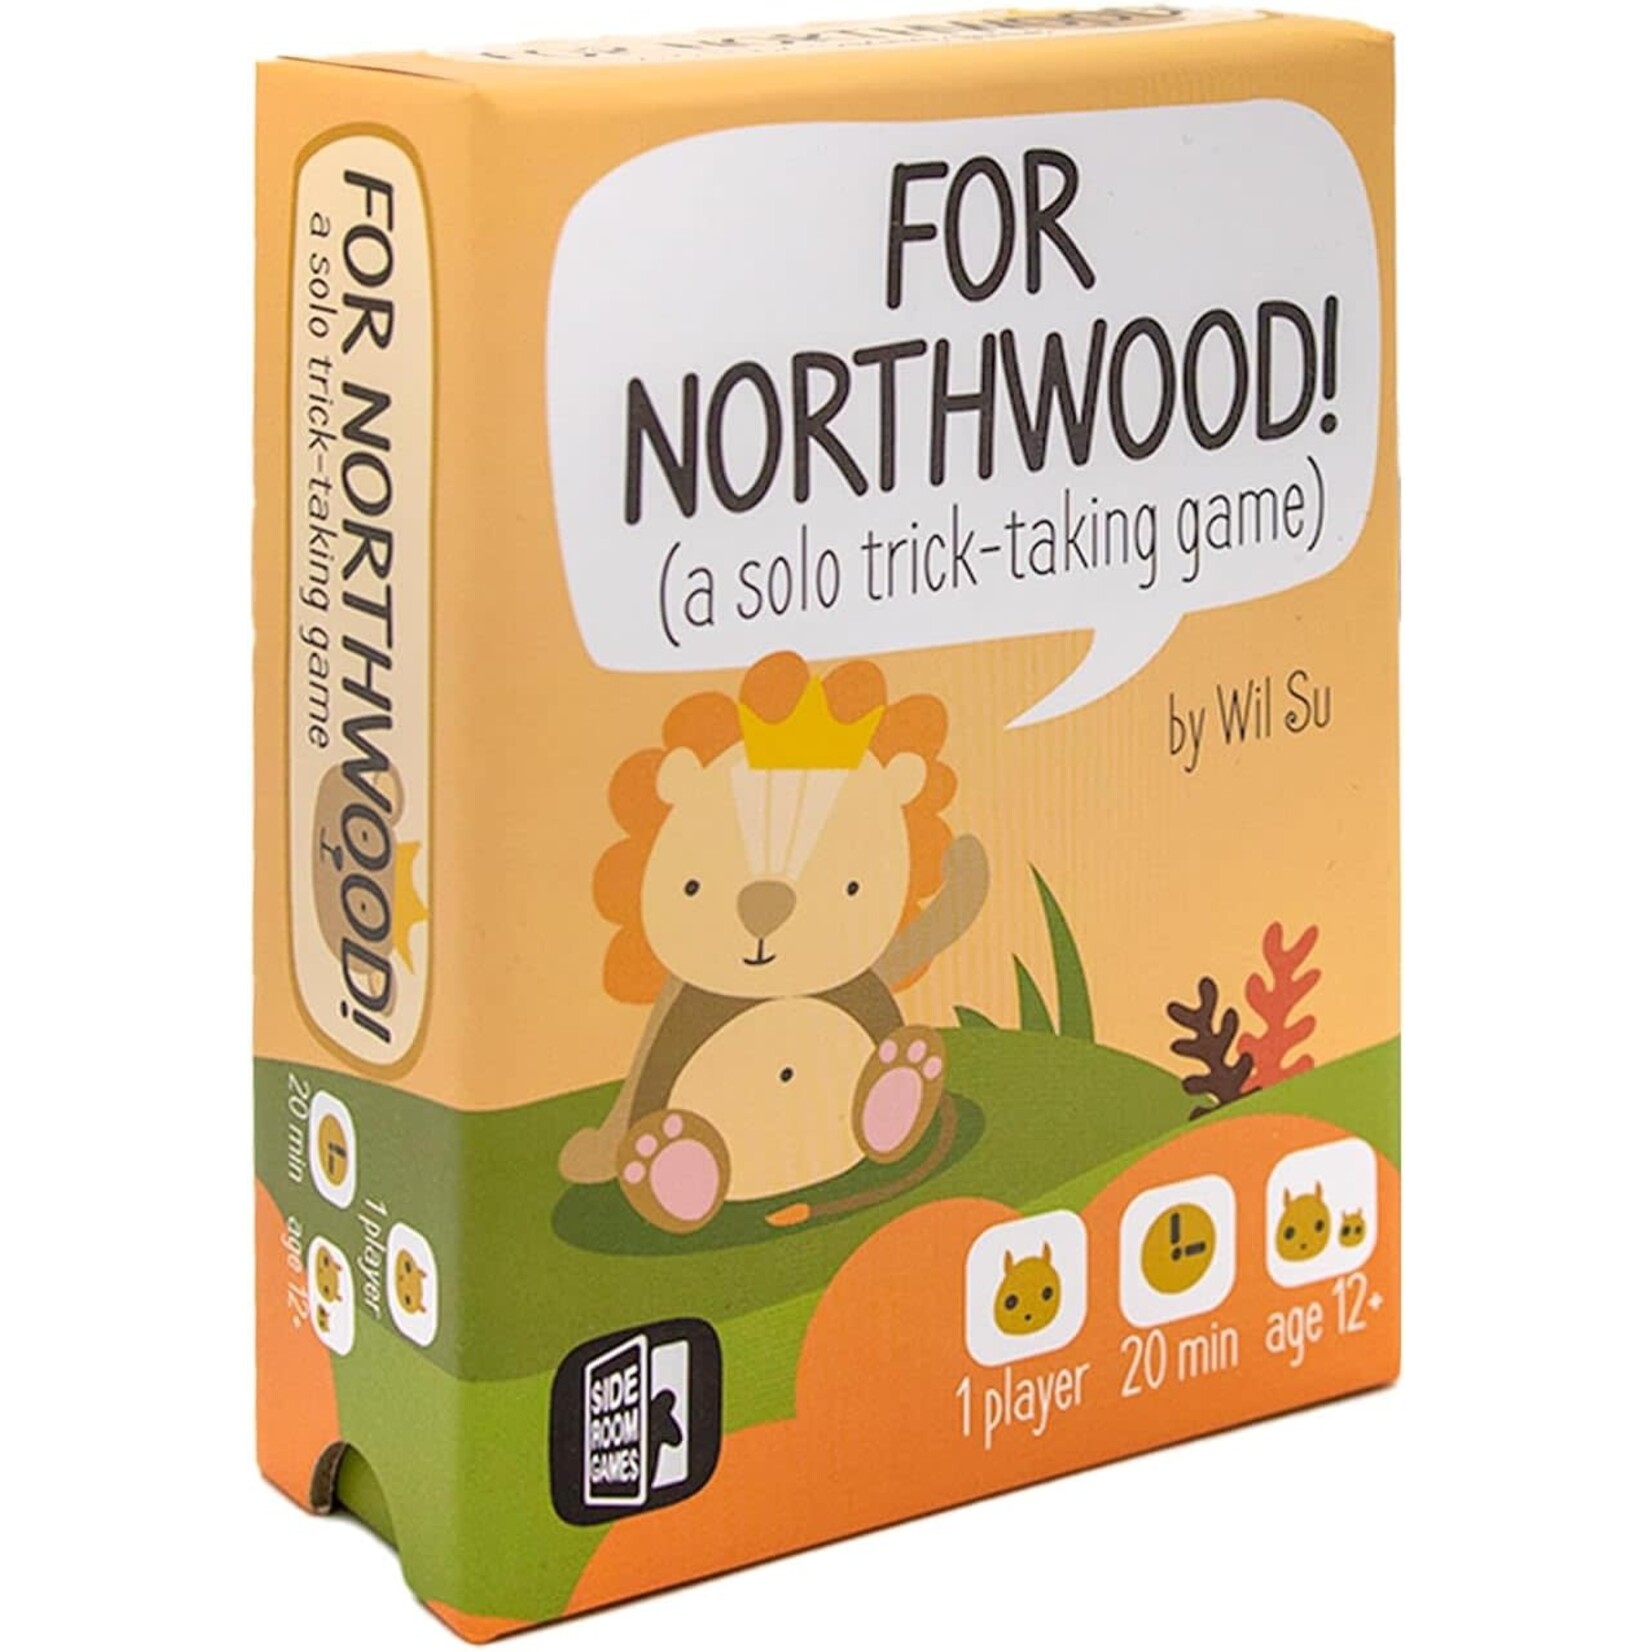 Side Room Games For Northwood! (a solo trick-taking game)